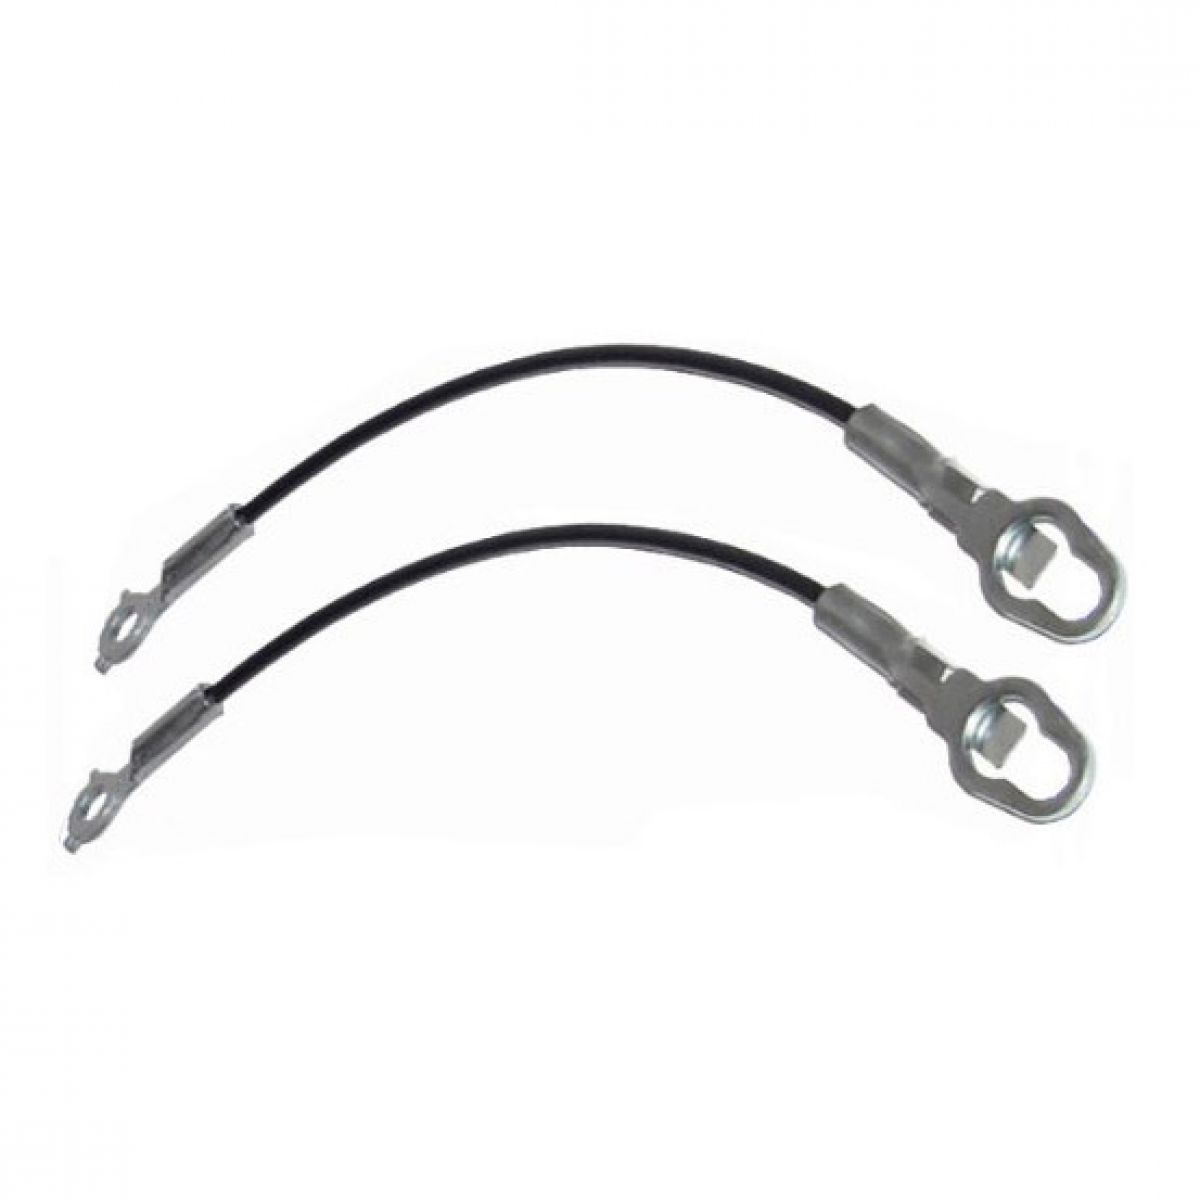 Toyota truck tailgate cable